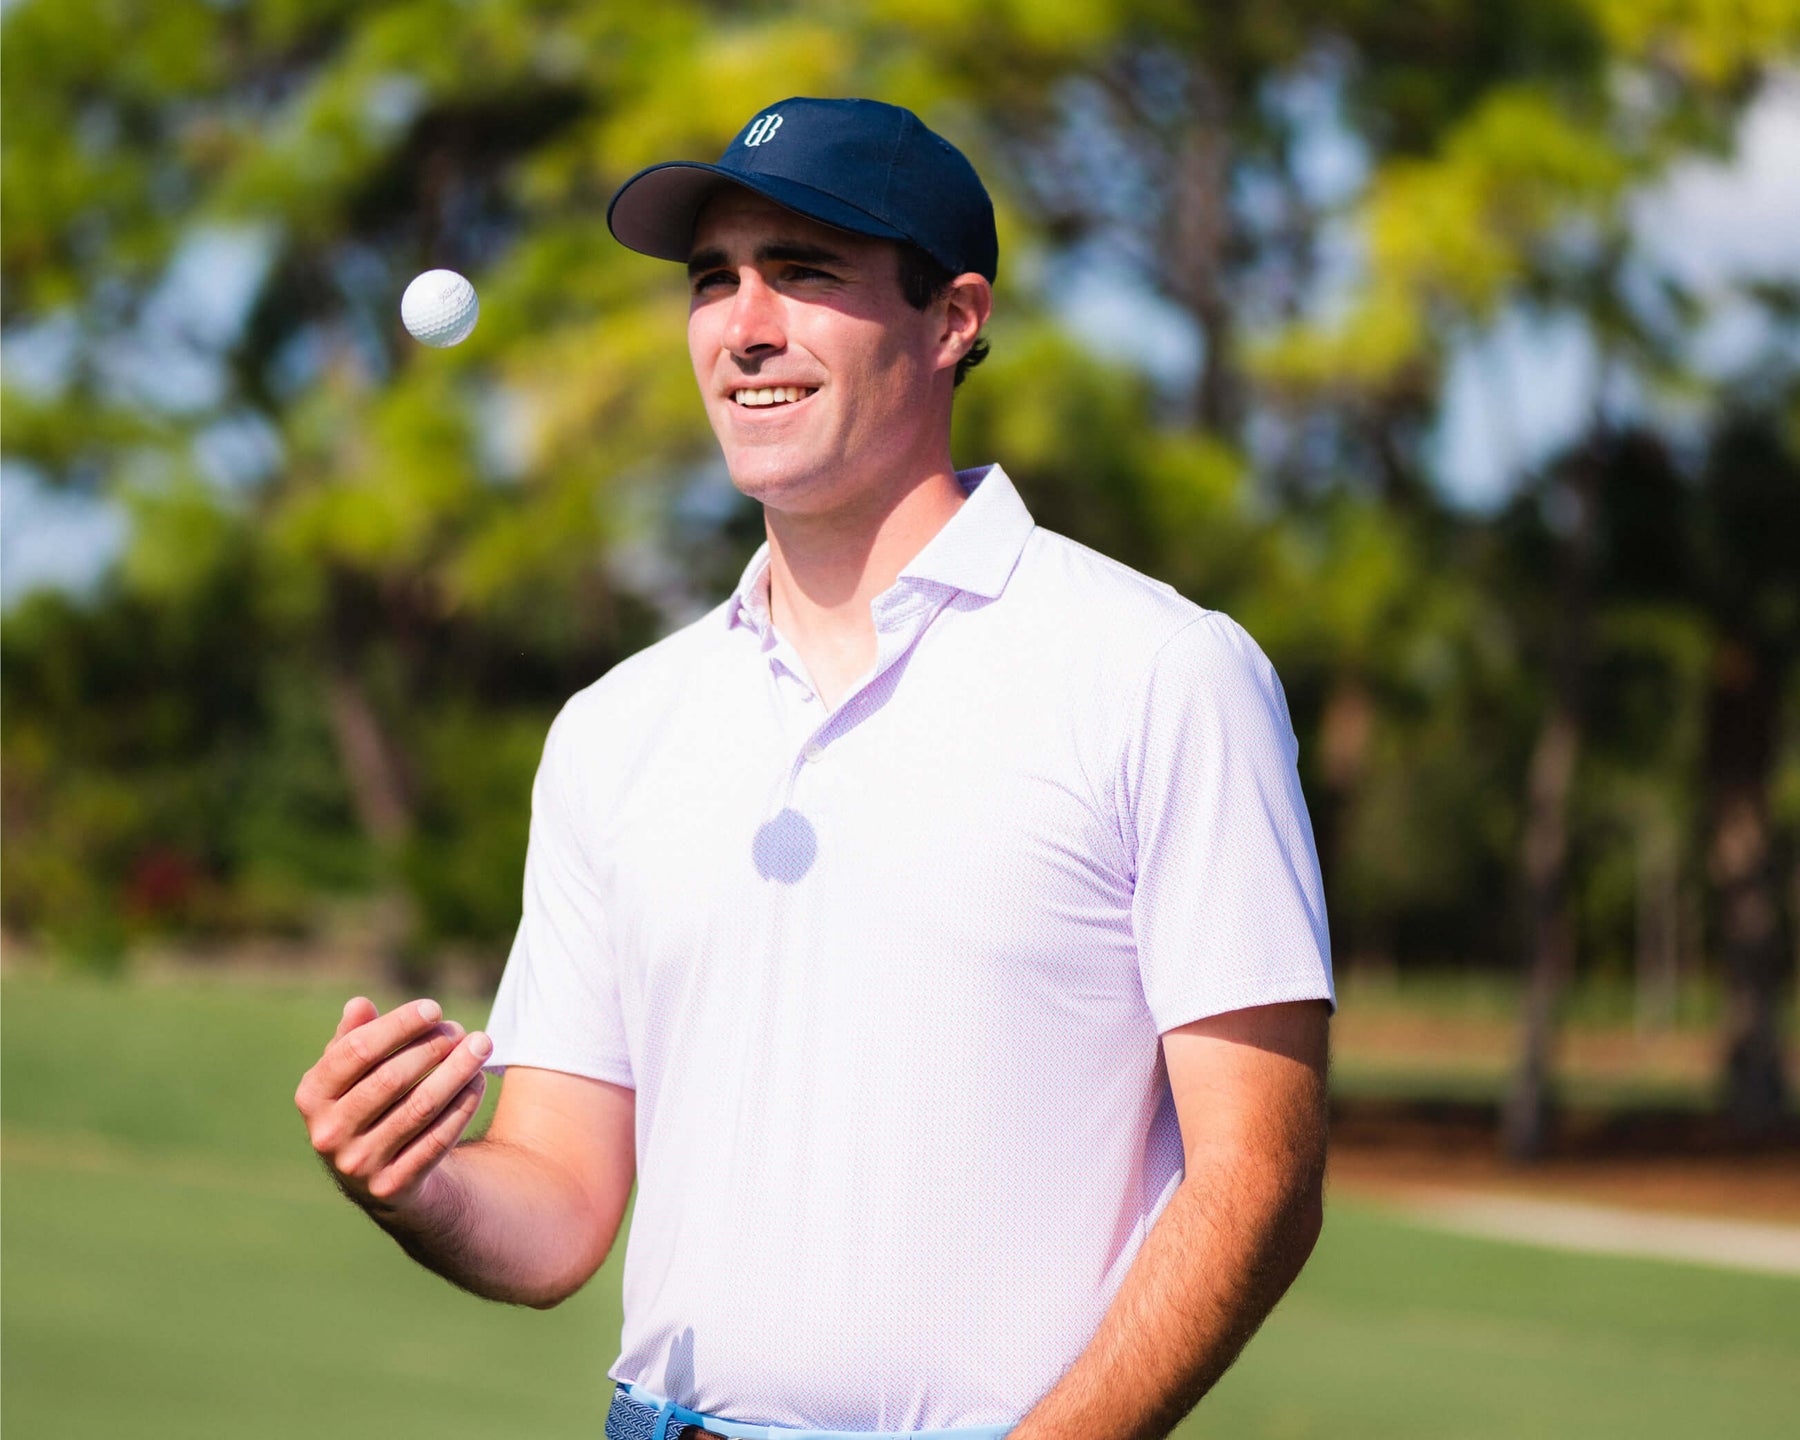 Male golfer wearing Holderness and Bourne navy promotional hat and white polo tosses golf ball in the air on golf course.